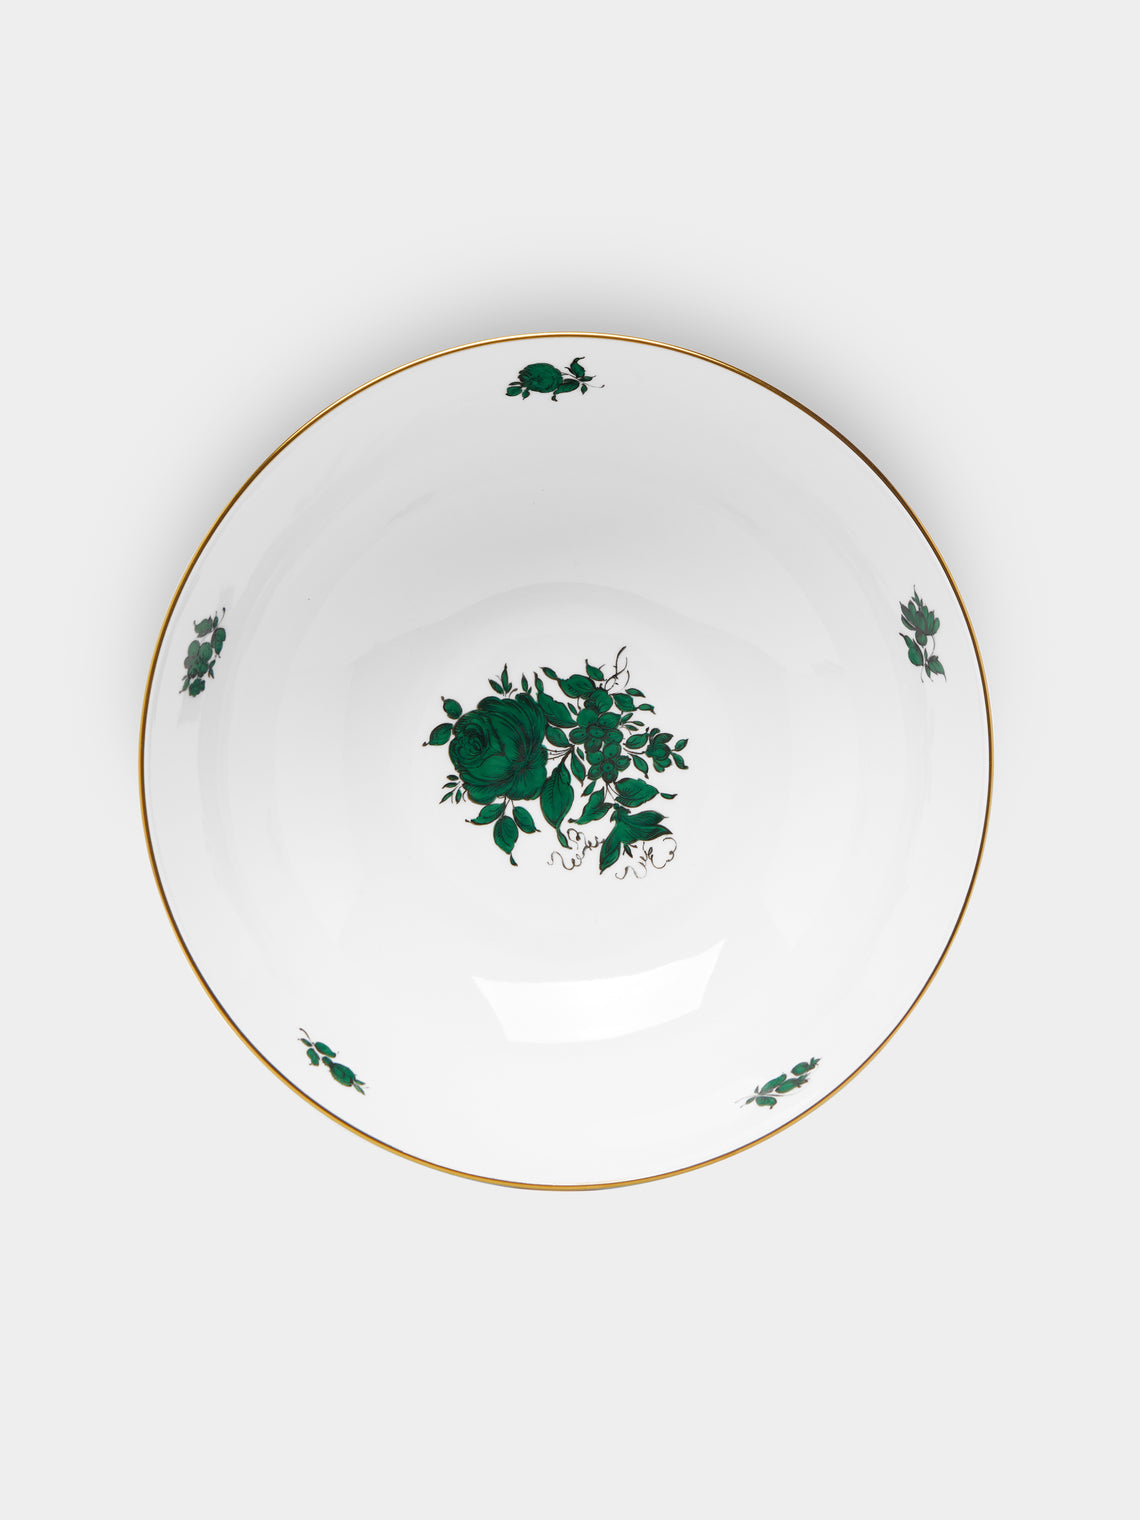 Augarten - Maria Theresia Hand-Painted Porcelain Salad Bowl -  - ABASK - 